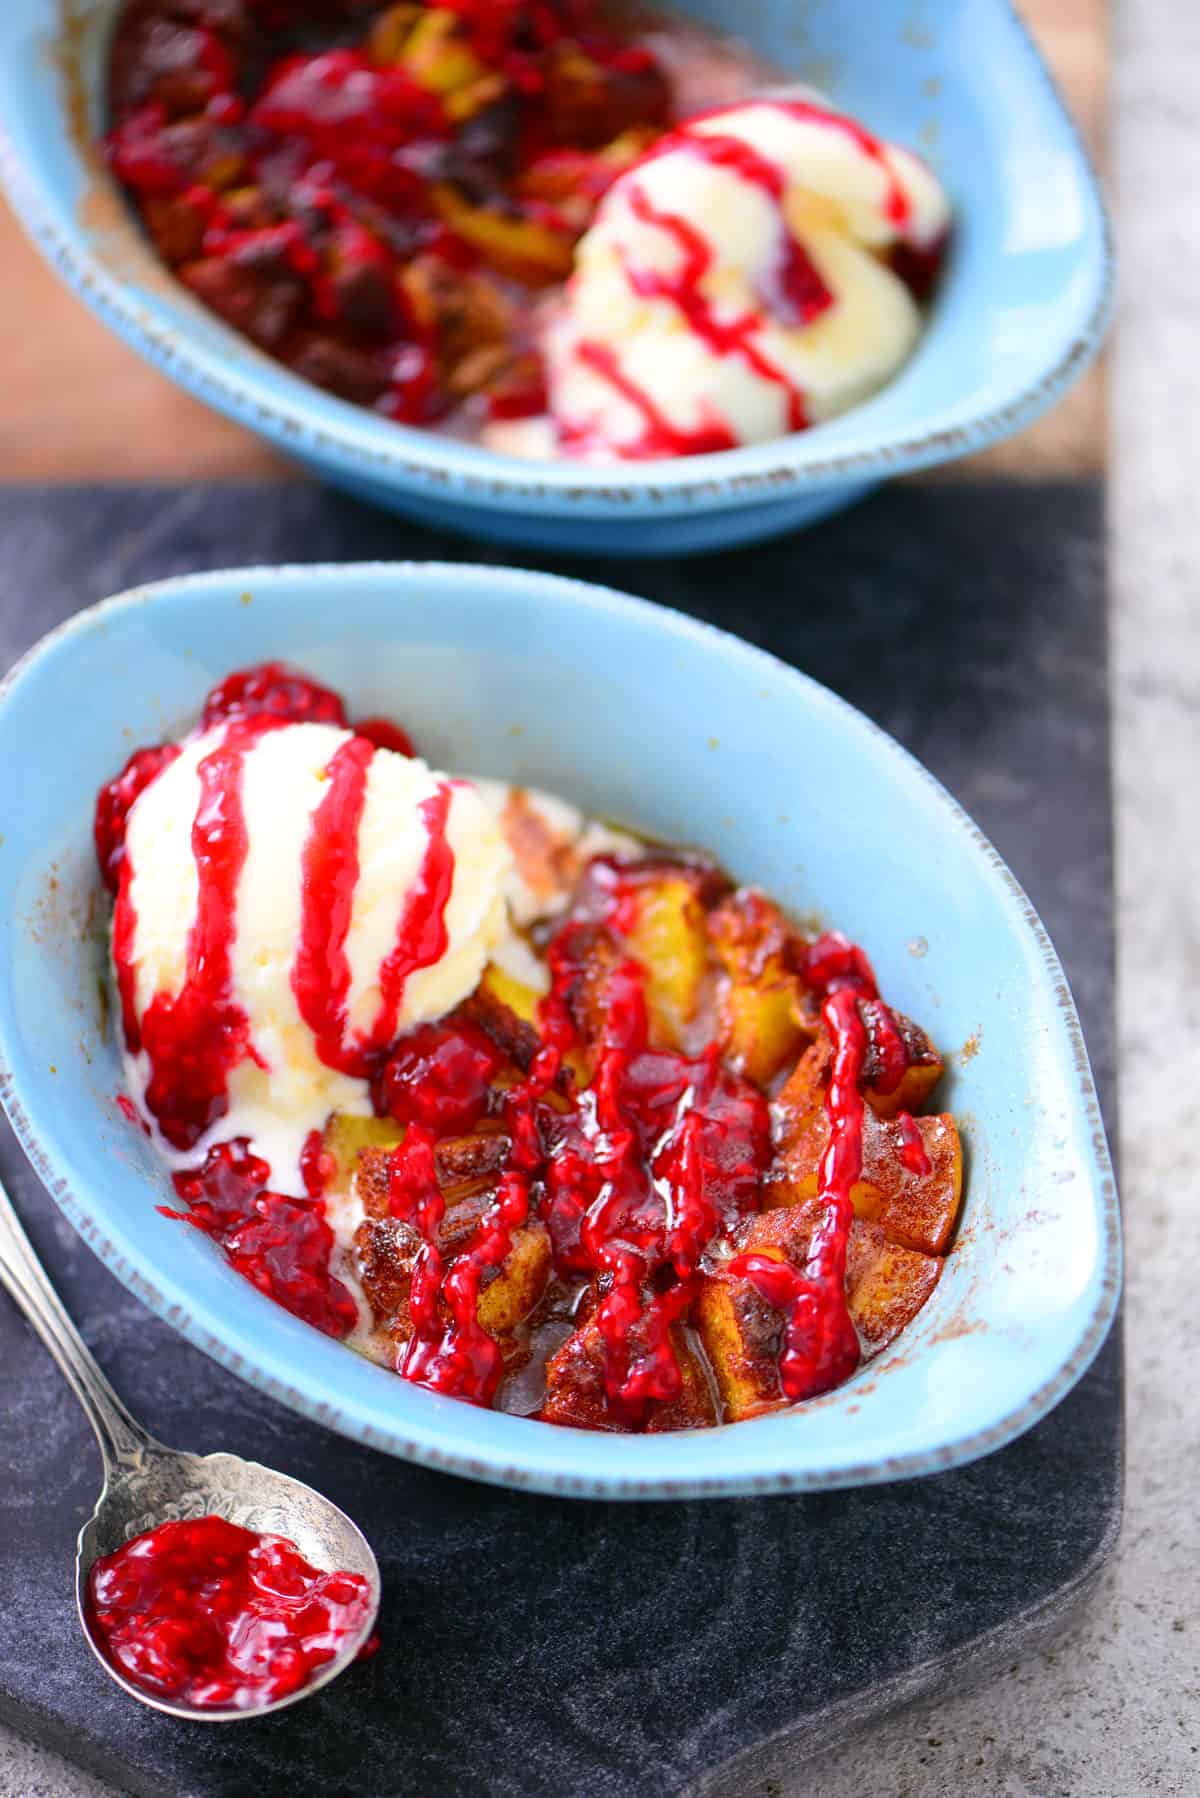 baked blooming peach with raspberry sauce and ice cream